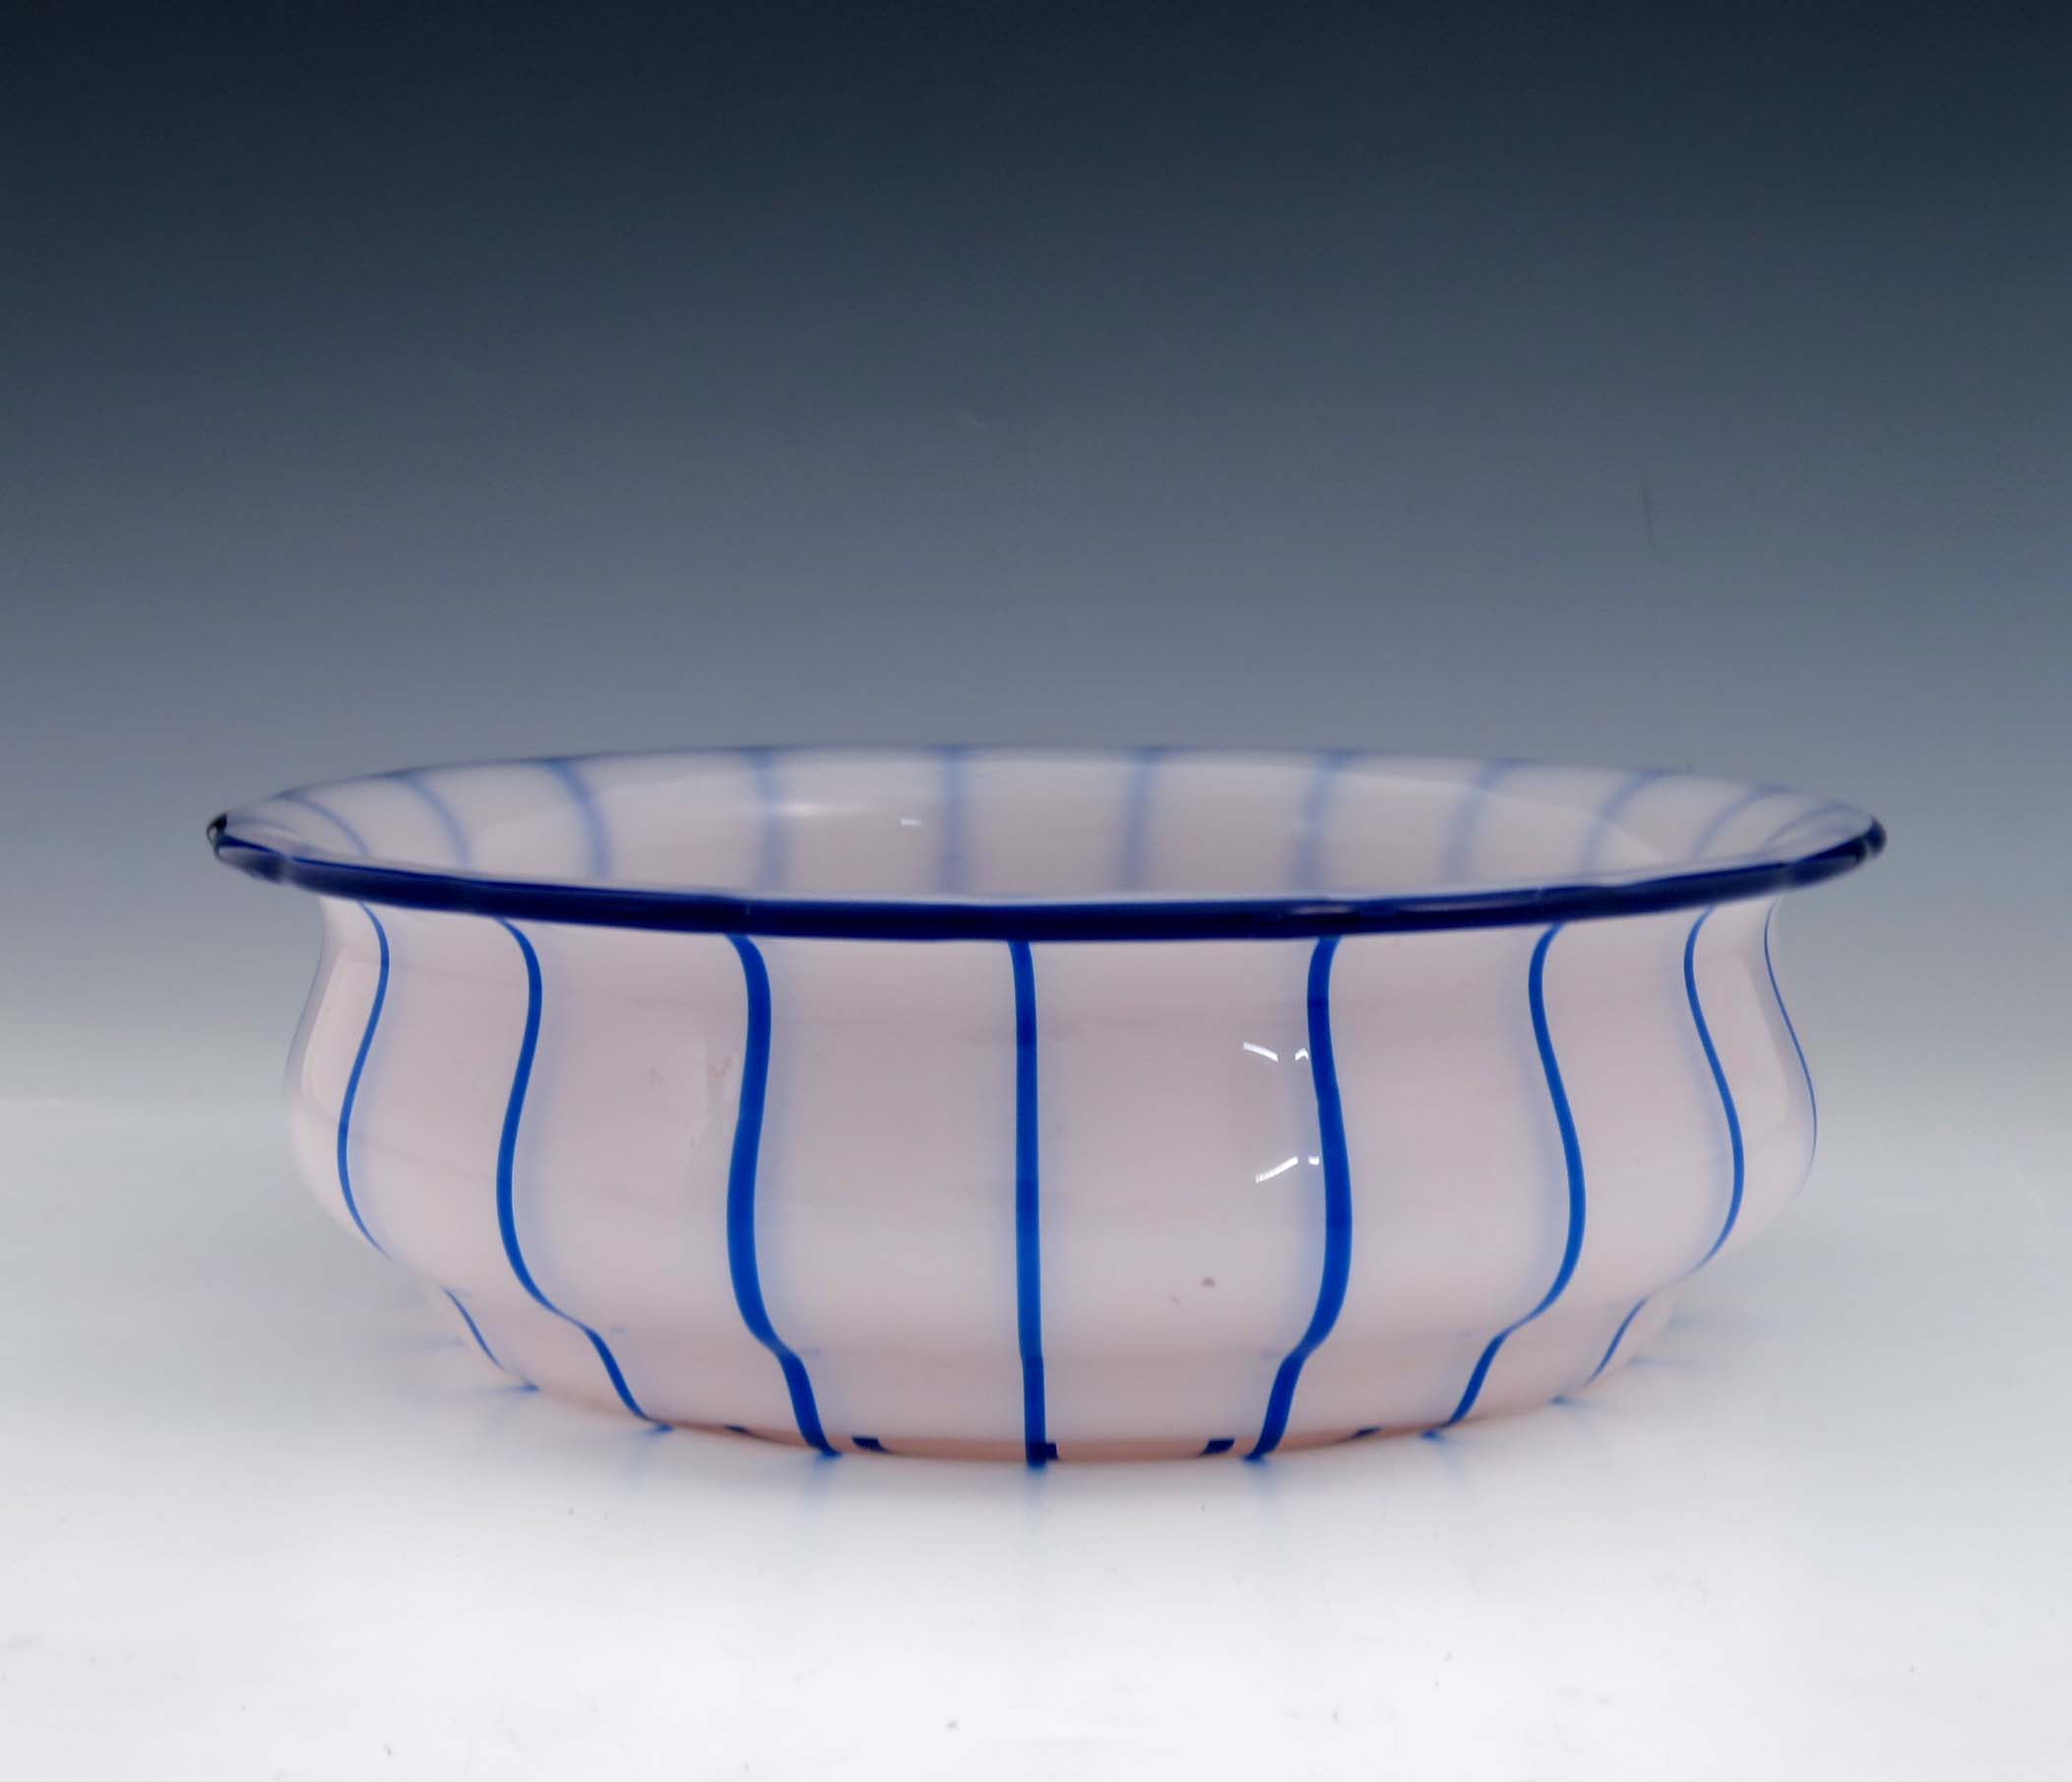 Michael Powolny for Loetz, a Secessionist glass bowl